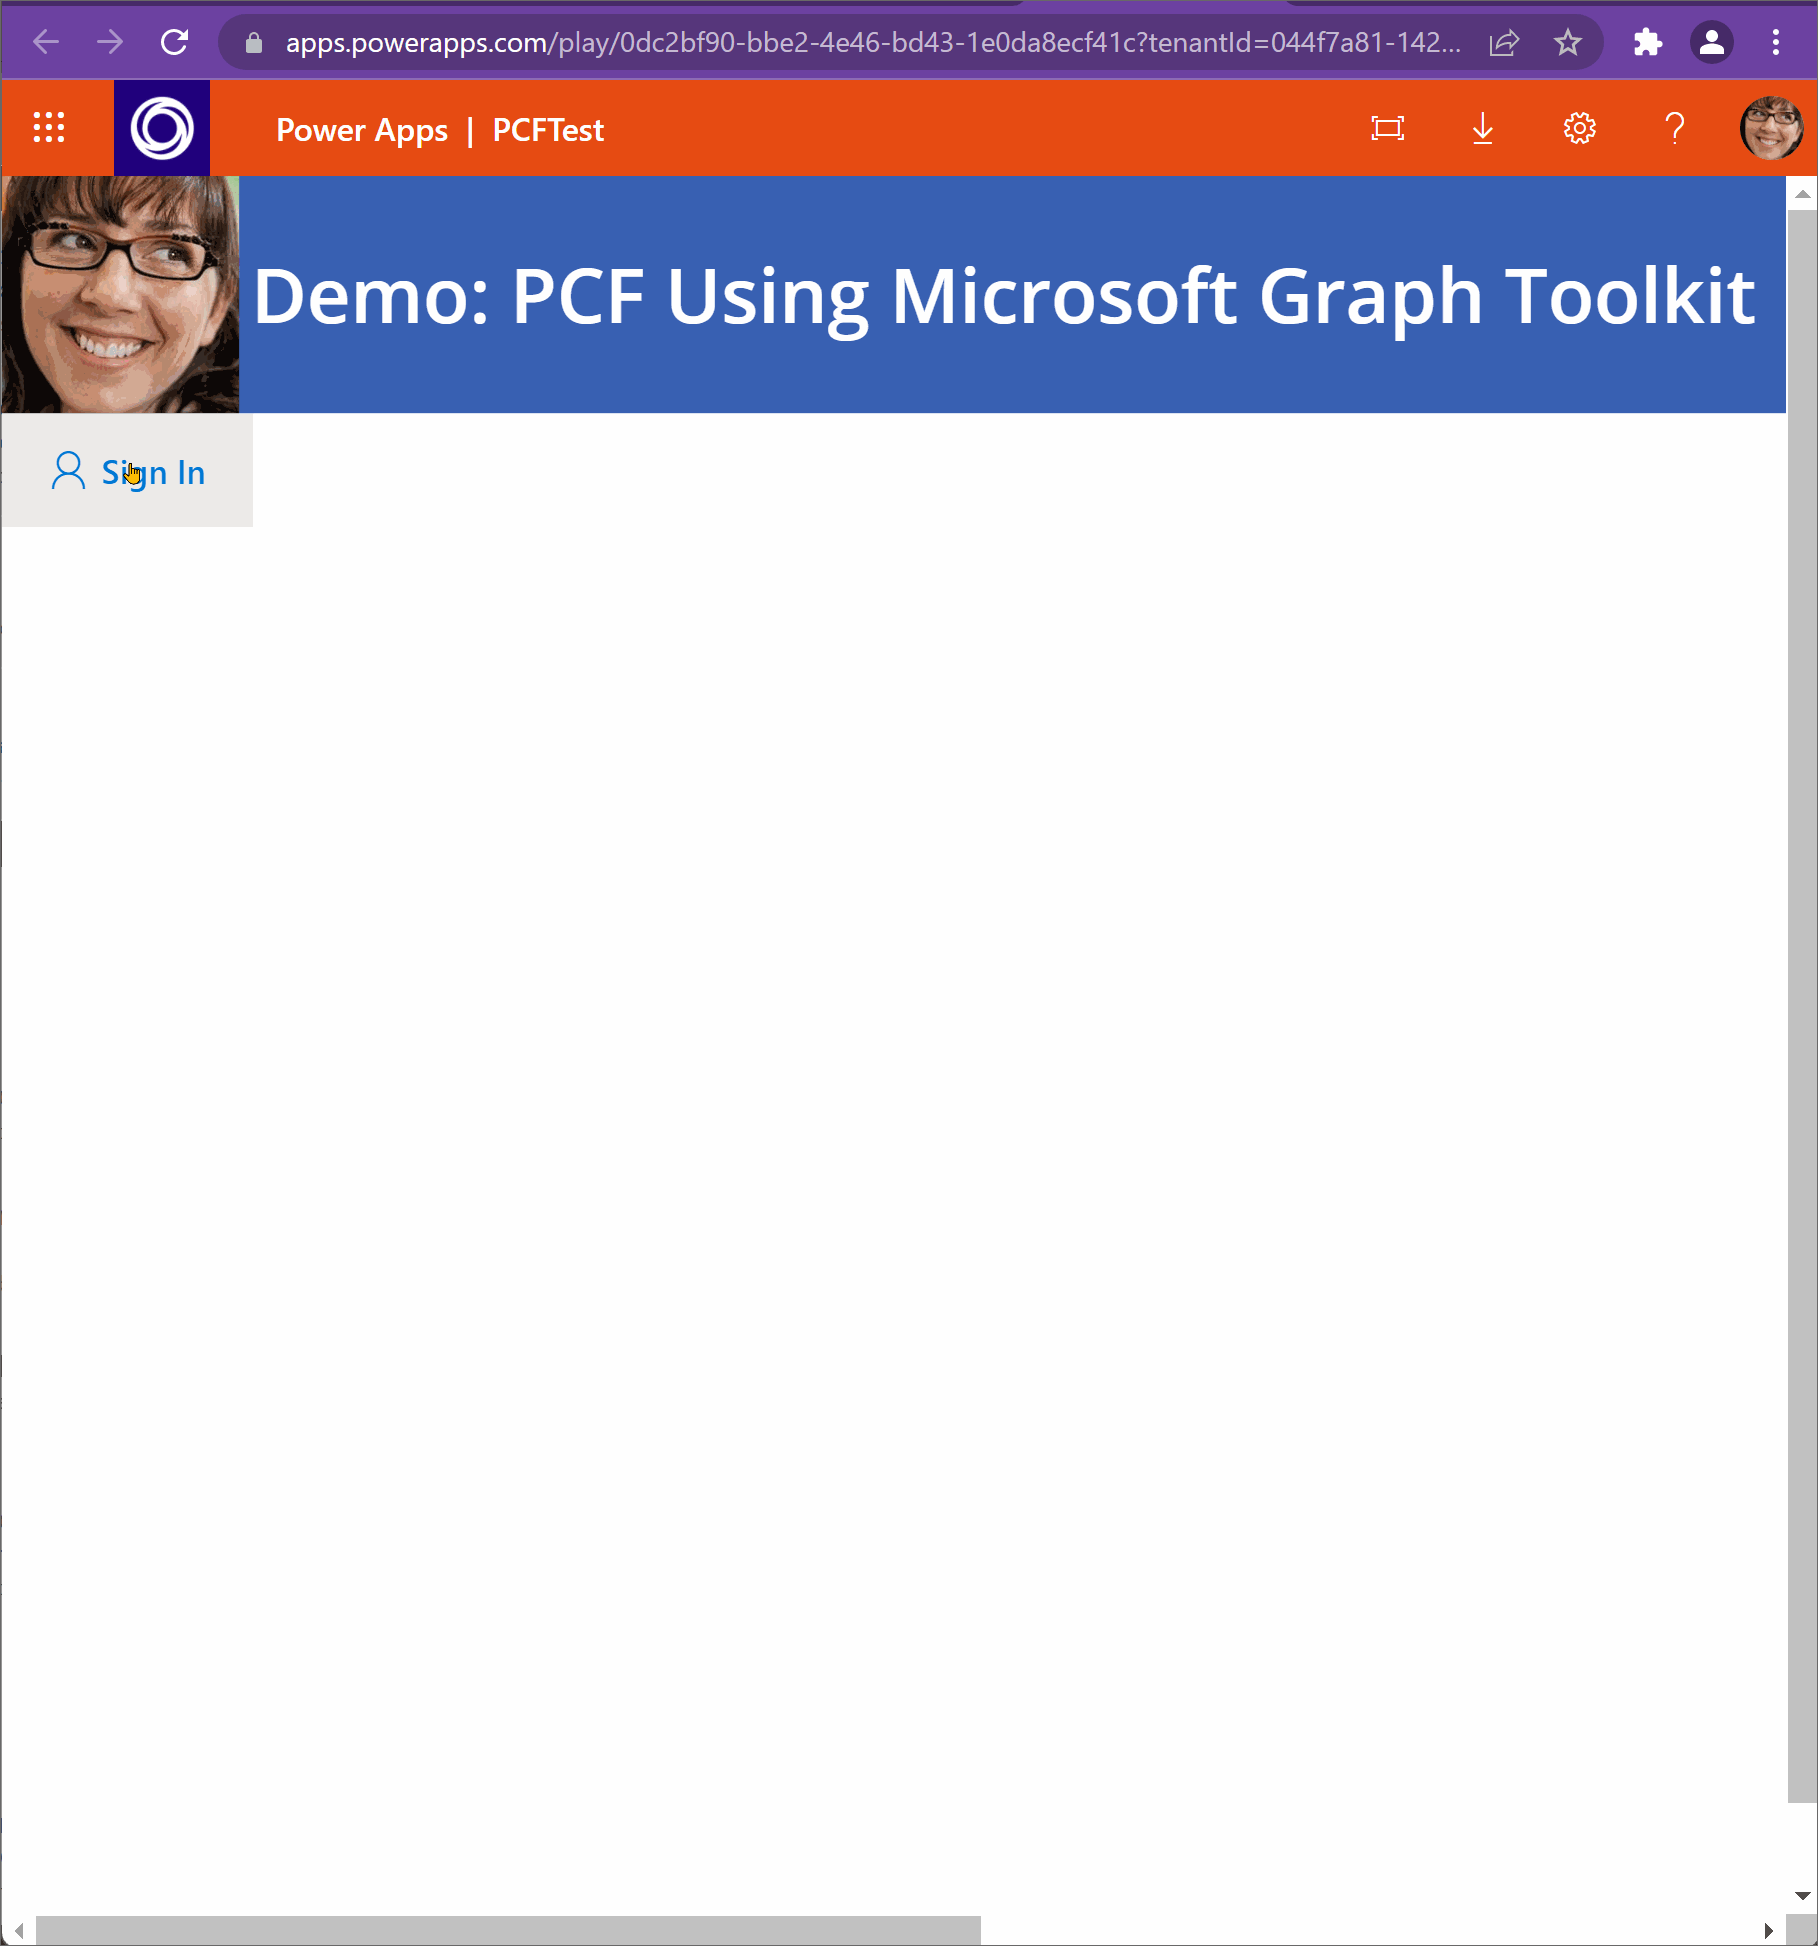 mgt-in-pcf-in-powerapp.gif